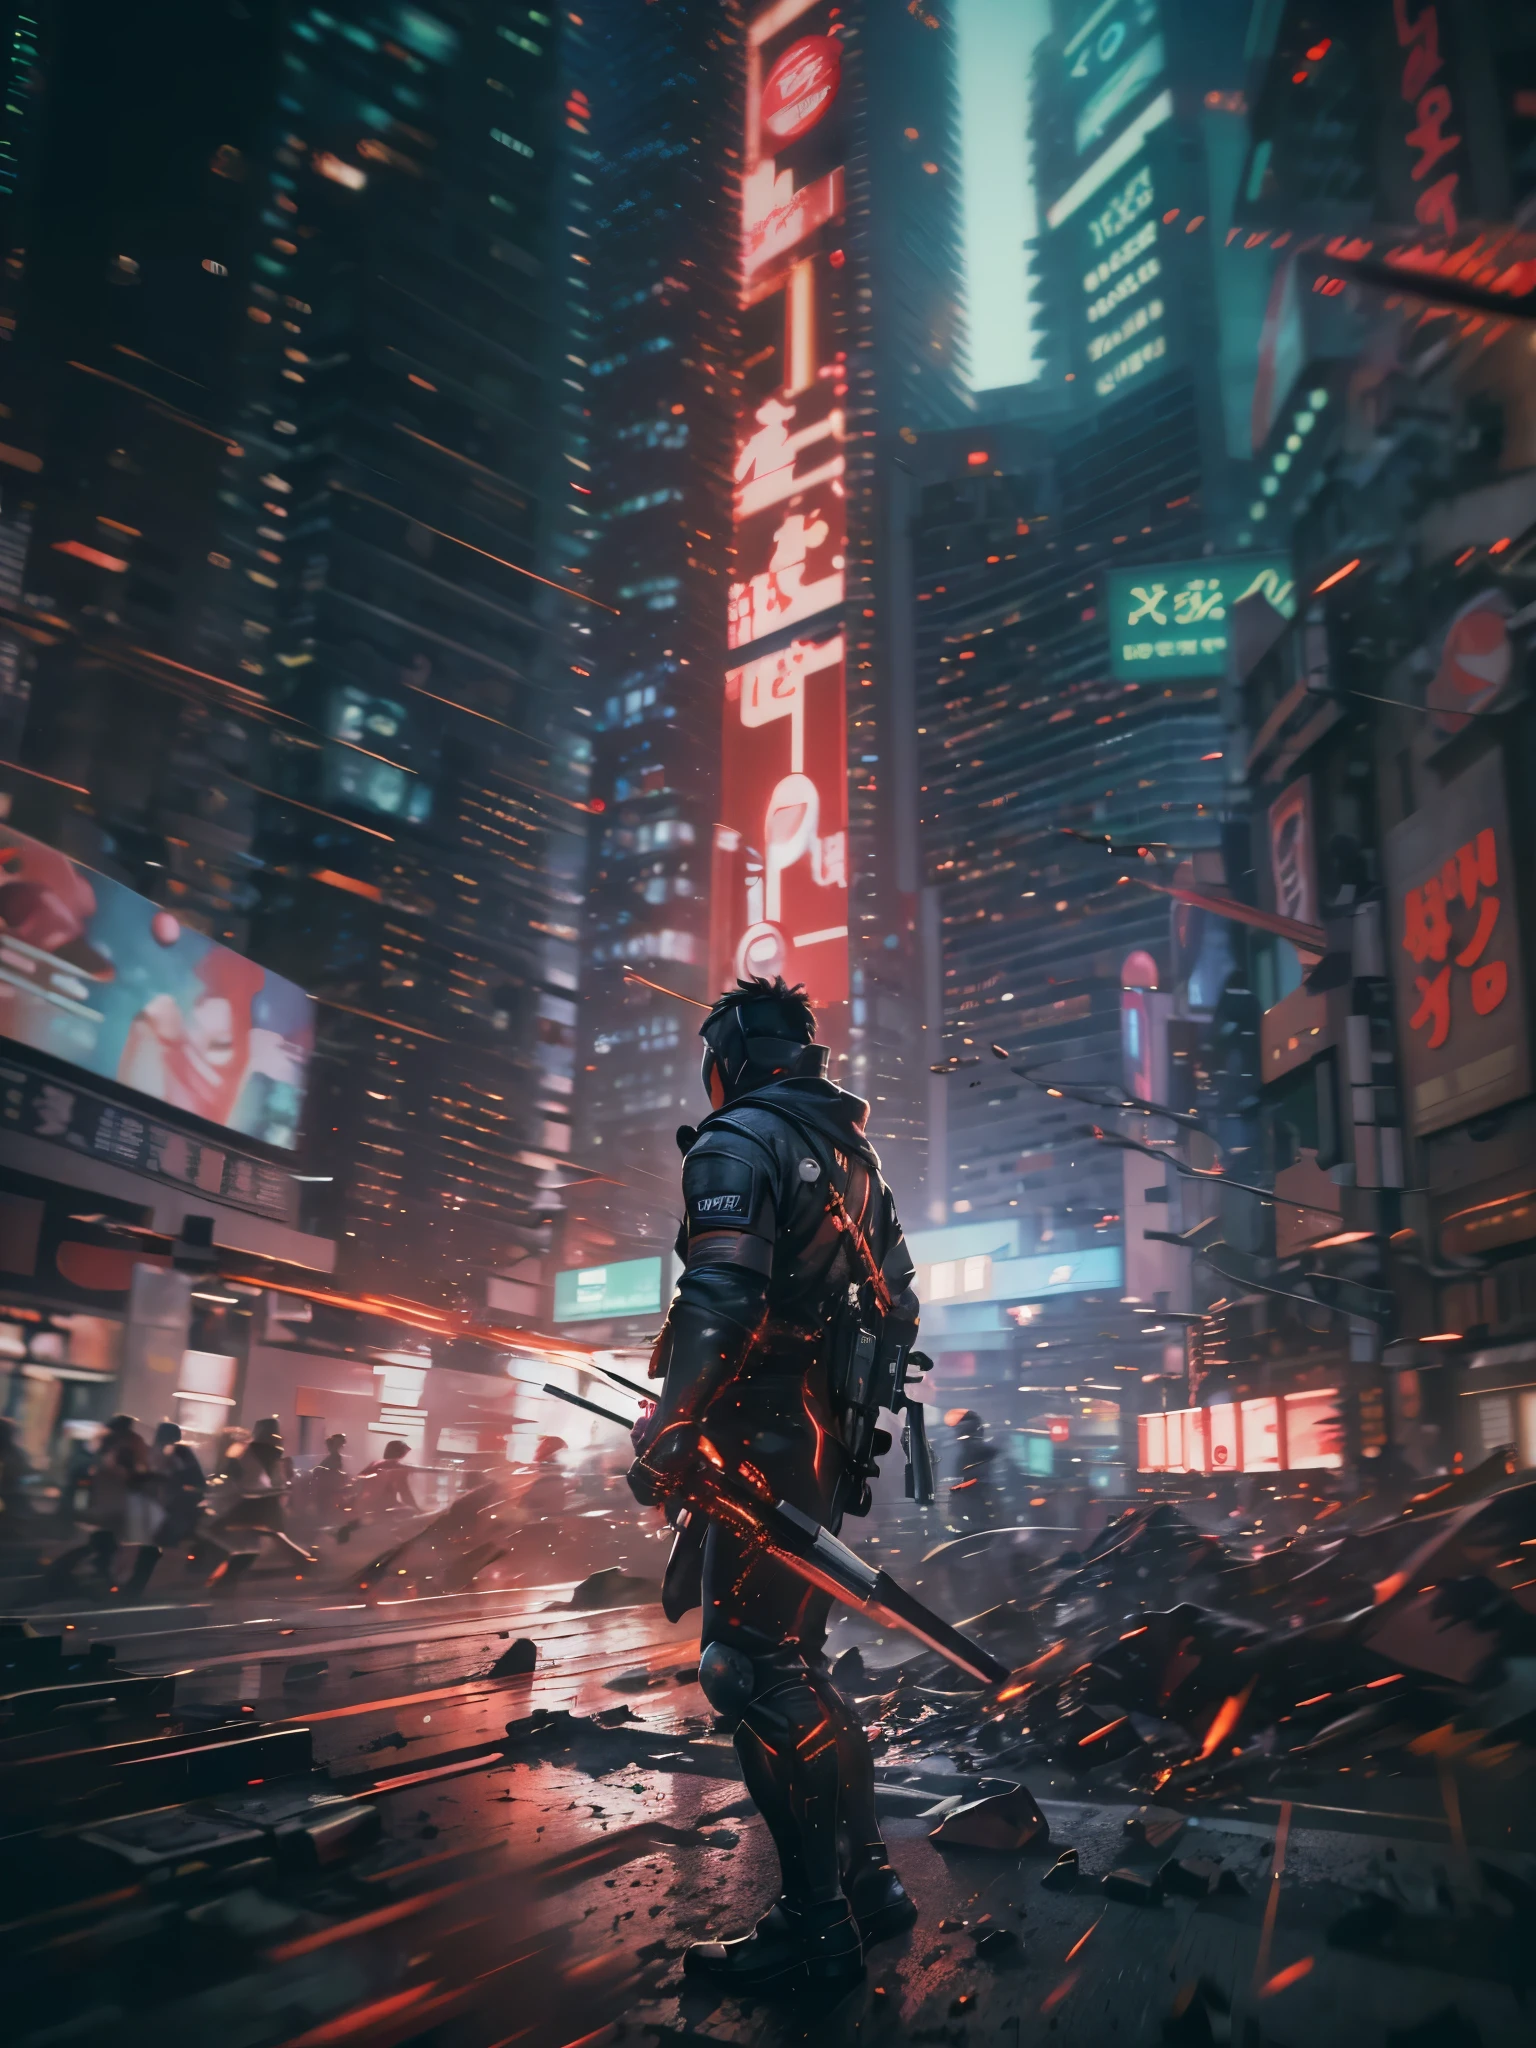 (high quality, 8k, 4K, high contrast, masterpiece: 1.2, 最high quality, best aesthetic), Shibuya crossing, post-apocalyptic, 1 man, focus, intense fight, fighting action pose, ((( Blur effect motion speed: 1.6))), destroyed Tokyo atmosphere, empty street scene, broken neon signs, depressing atmosphere, fast movement, ((motion blur on arms)), shadow assassin, assassinating an enemy , destroyed architecture, blood on the ground, less blood stained, evil energy, cinematic colors, dynamic settings, atmospheric perspective, epic lighting, (1vs1), (desenfundado).